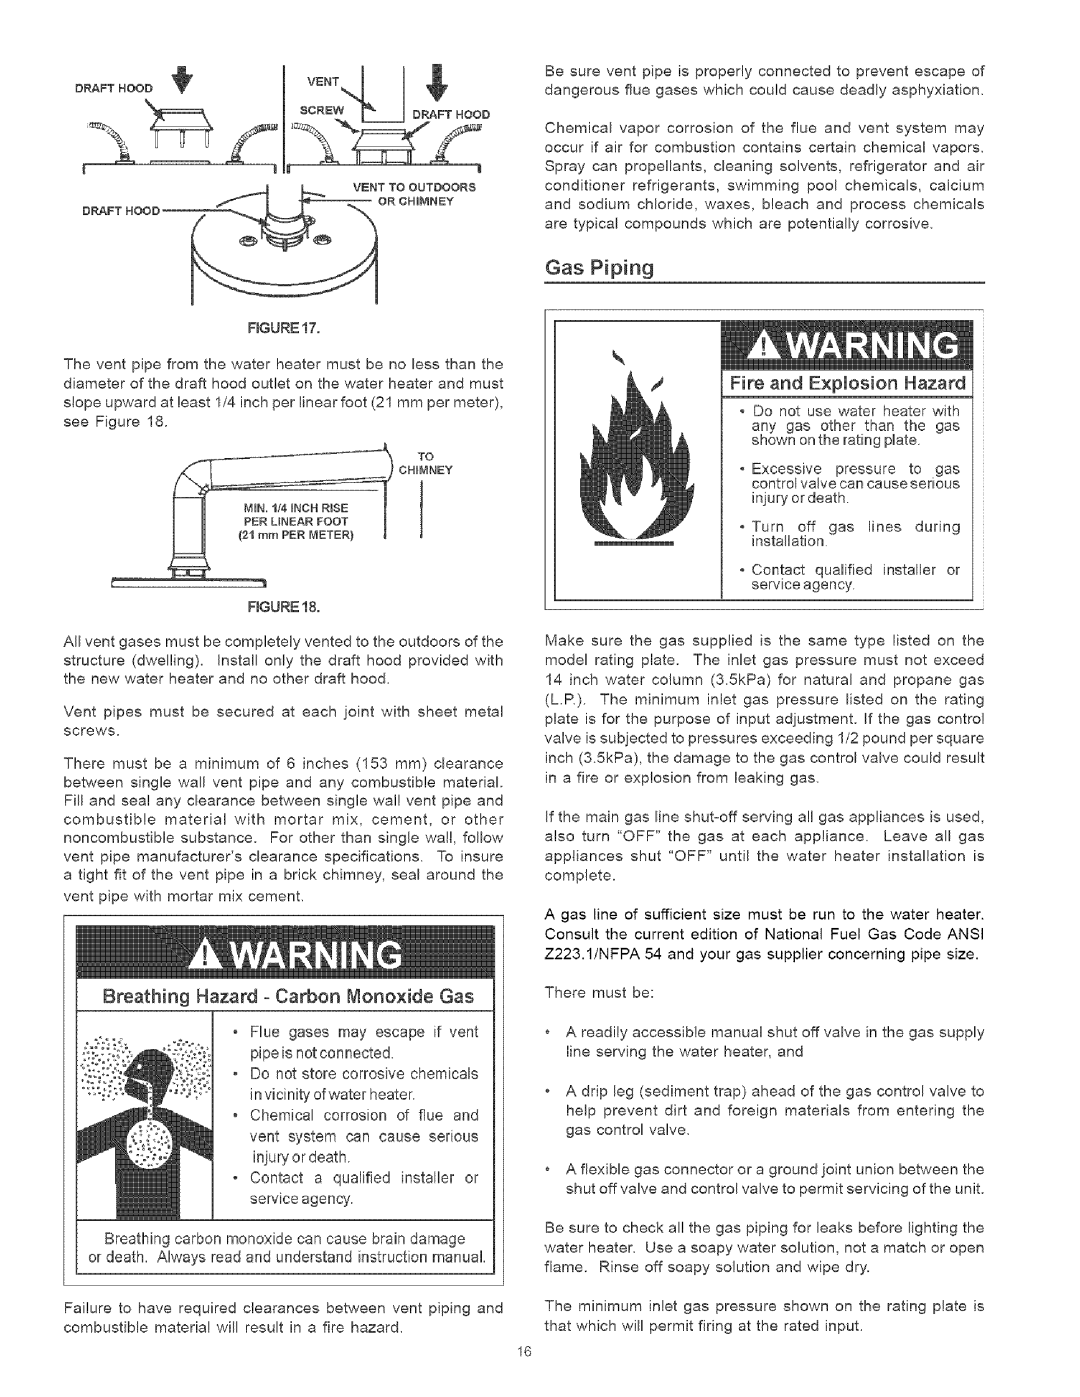 Kenmore 153.336262 Gas Piping, Fire and Expmosion Hazard, Do not store corrosive chemicals, in vicinity of water heater 